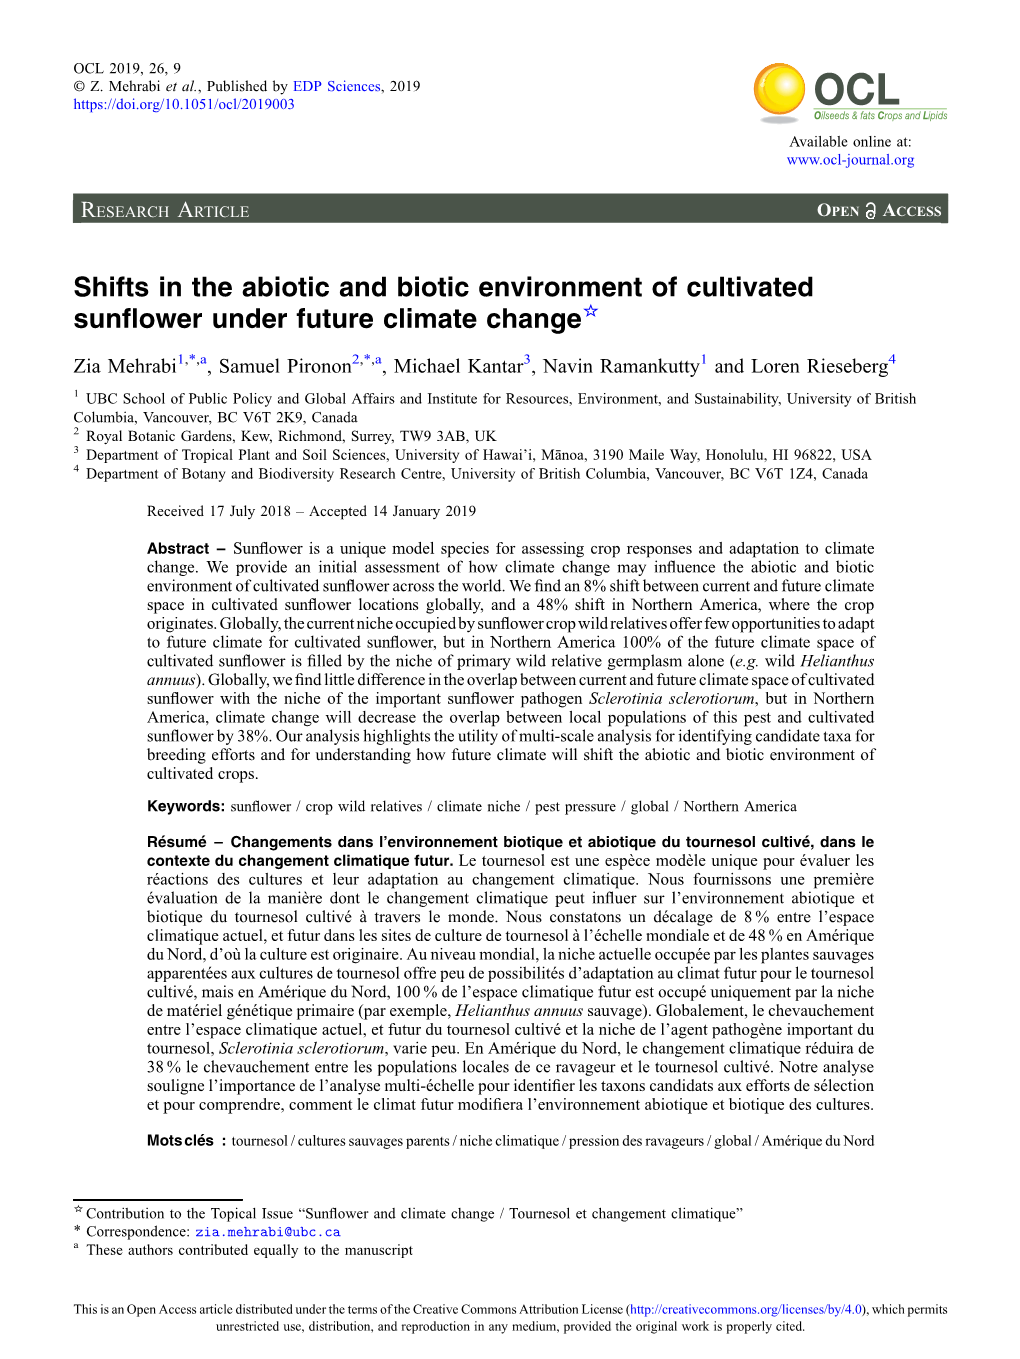 Shifts in the Abiotic and Biotic Environment of Cultivated Sunflower